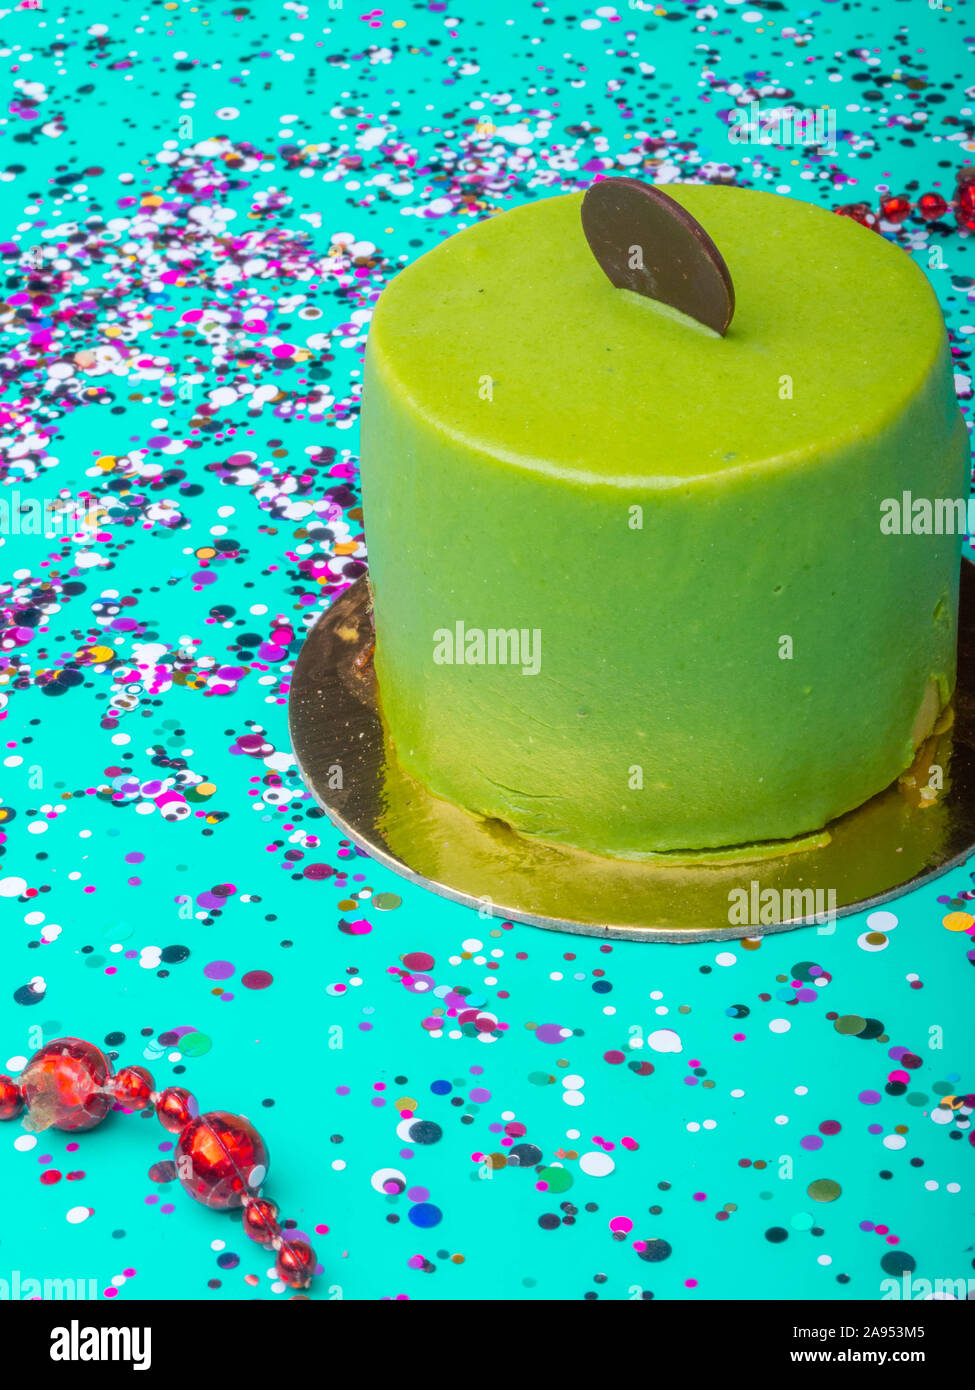 Delicious sweet french lime mouse cakes with green mint glaze, chocolate  slice, Modern desserts on trend color mint background Stock Photo - Alamy